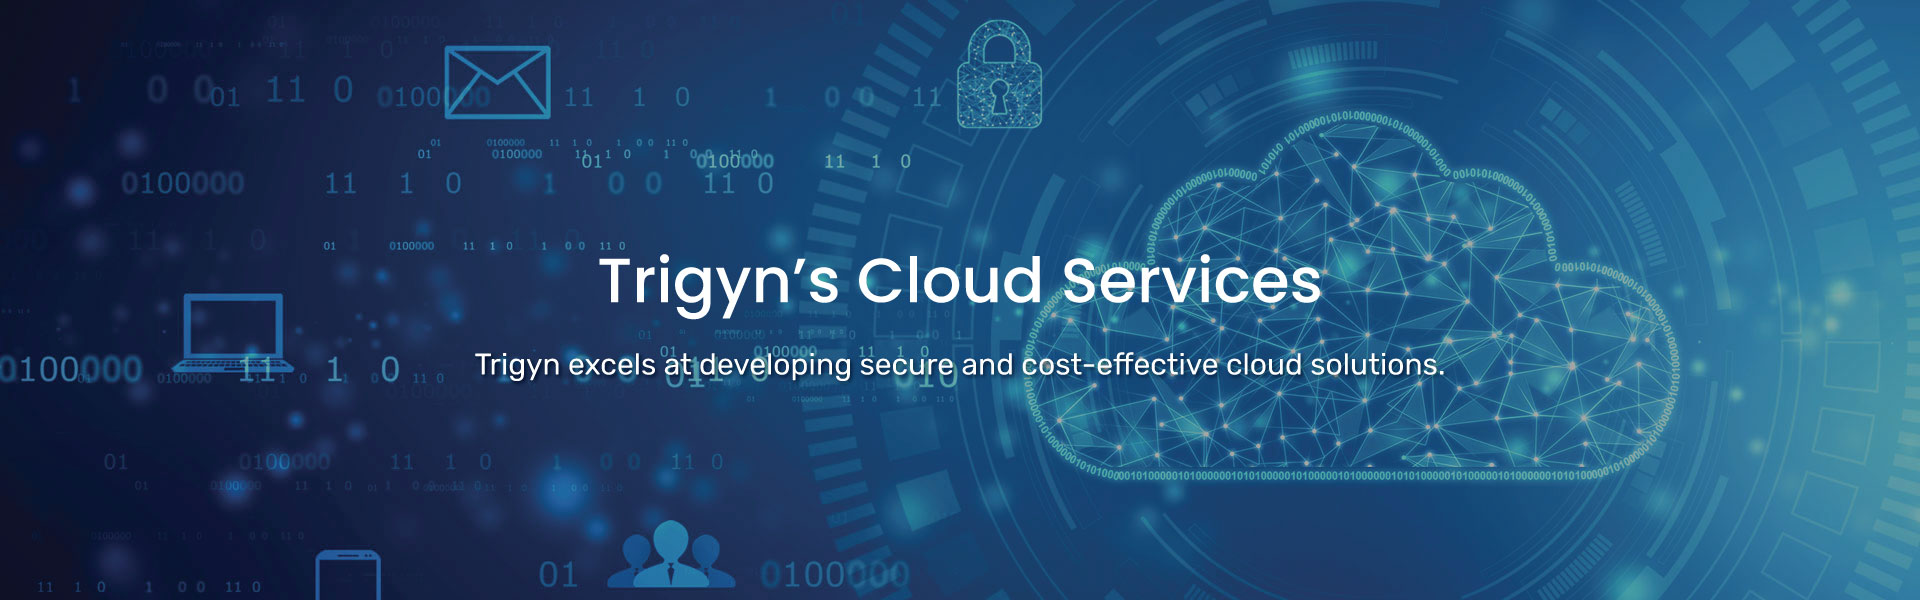 Trigyn’s Cloud Services Capabilities